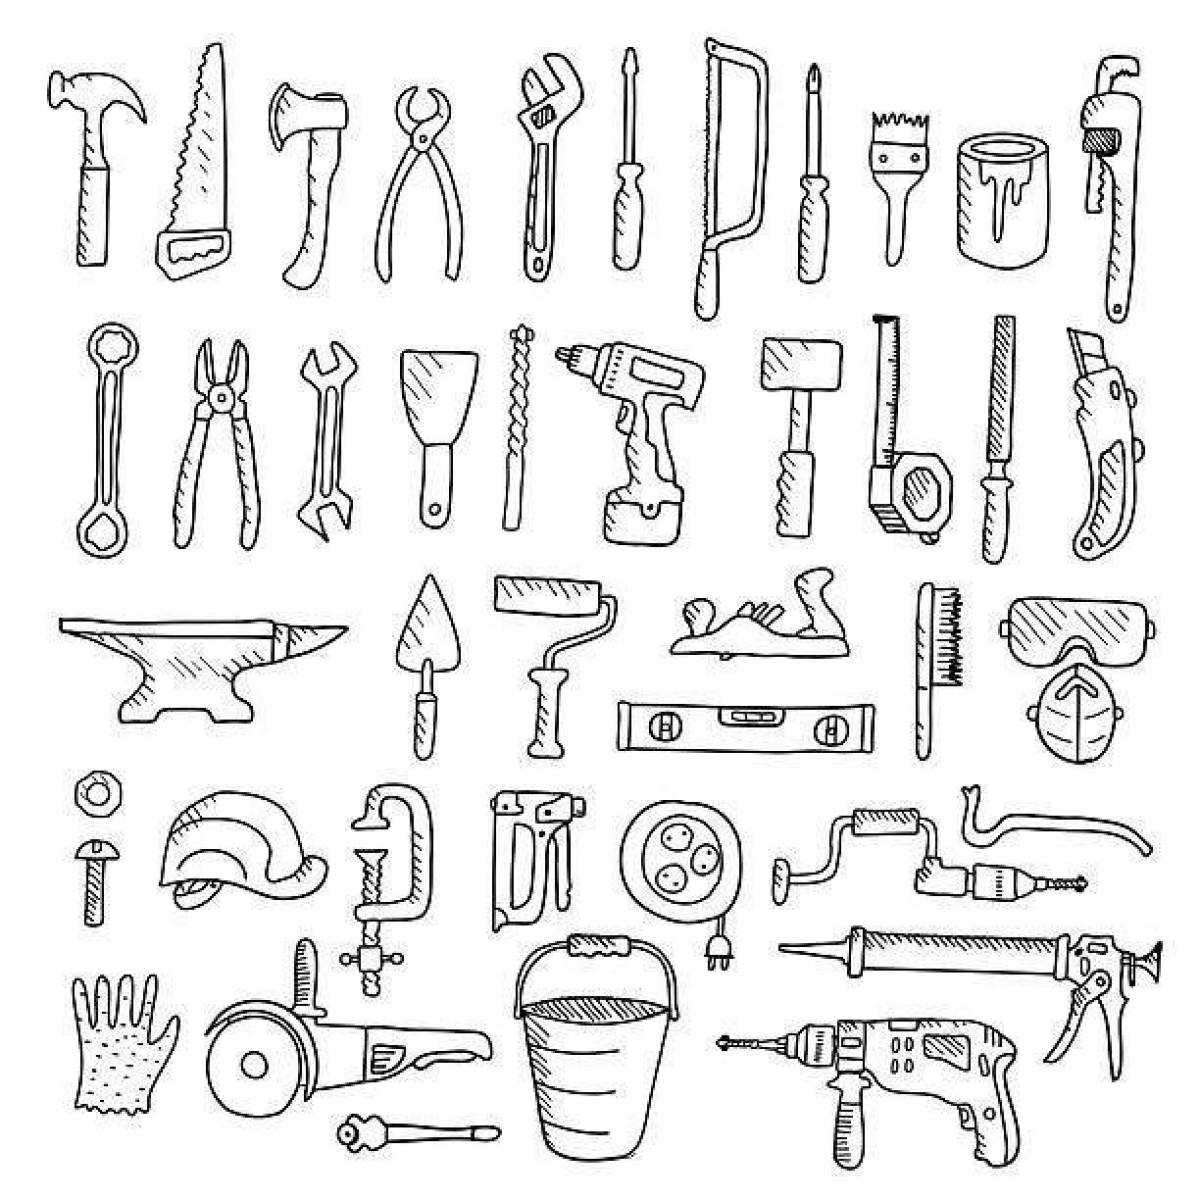 Fun coloring pages of construction tools